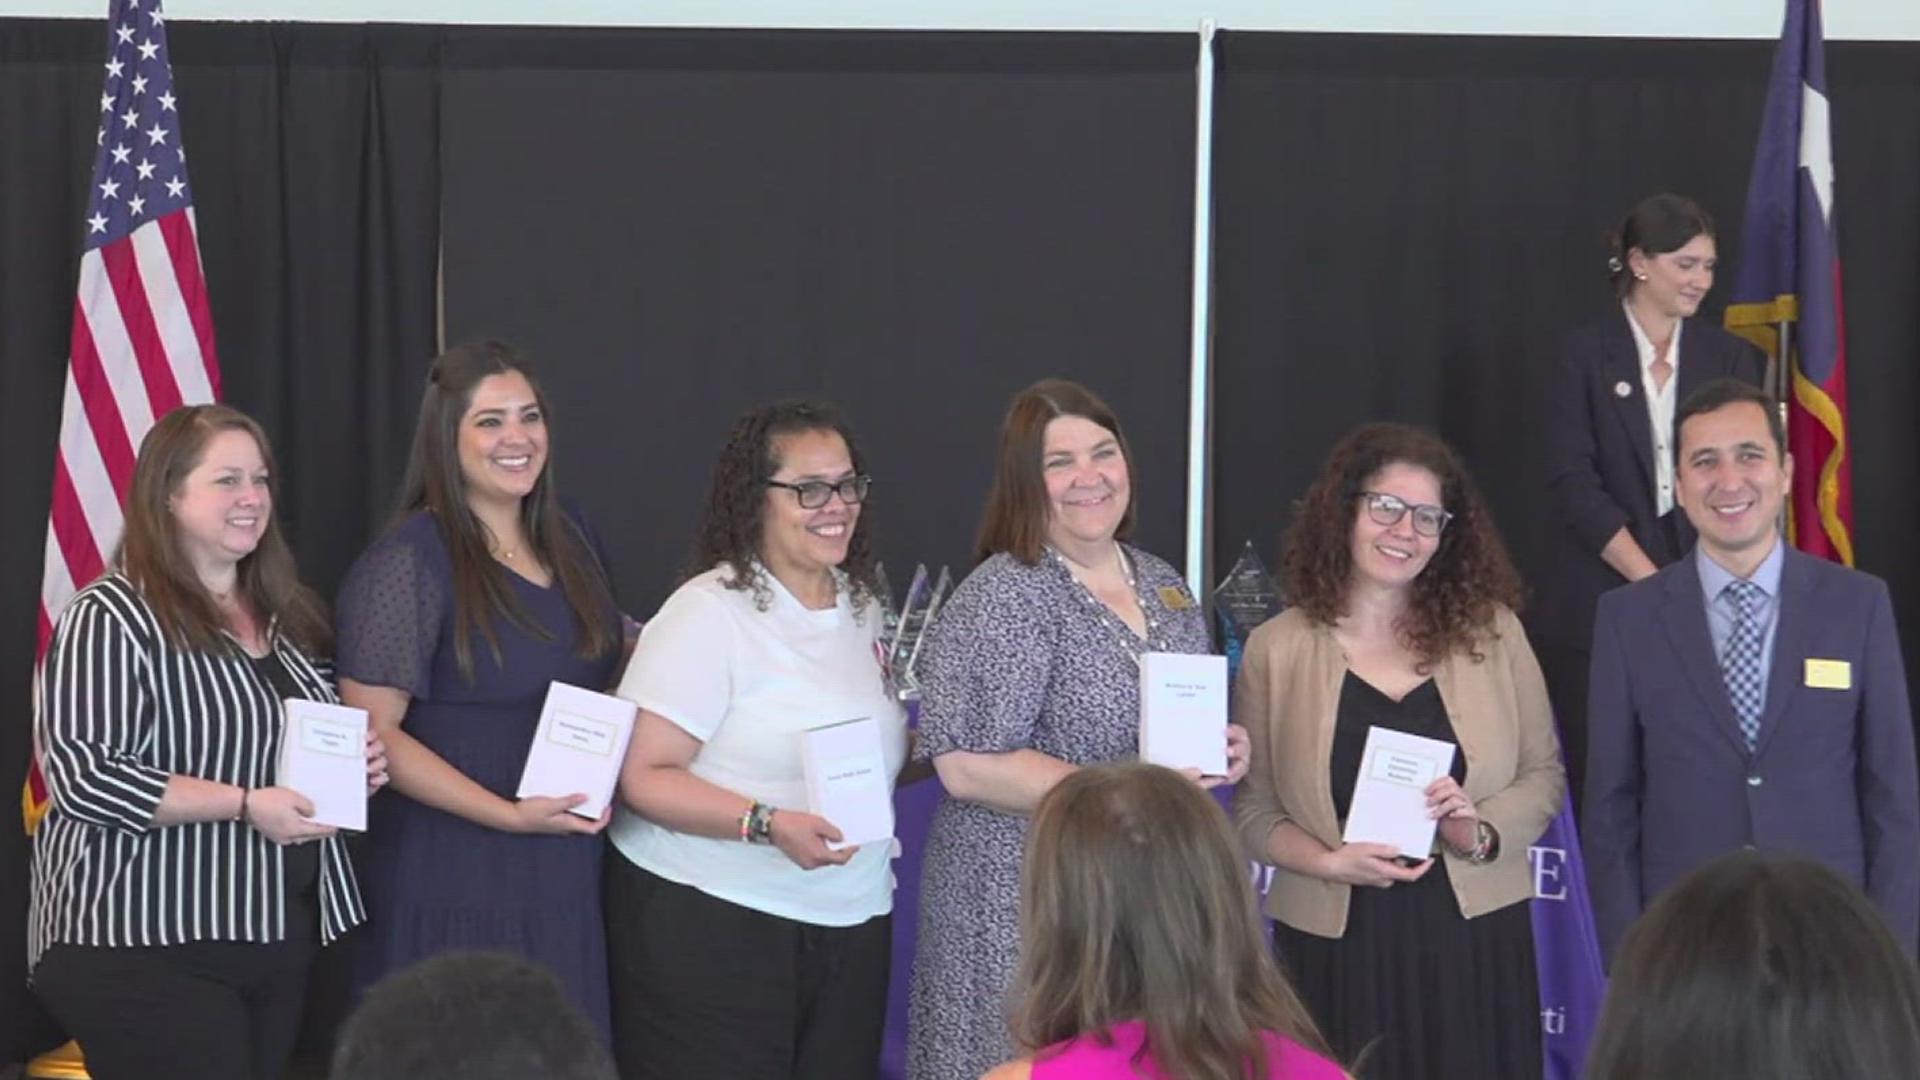 The ceremony was an opportunity to recognize the individuals, corporations and local businesses that go the extra mile to provide support to the school.